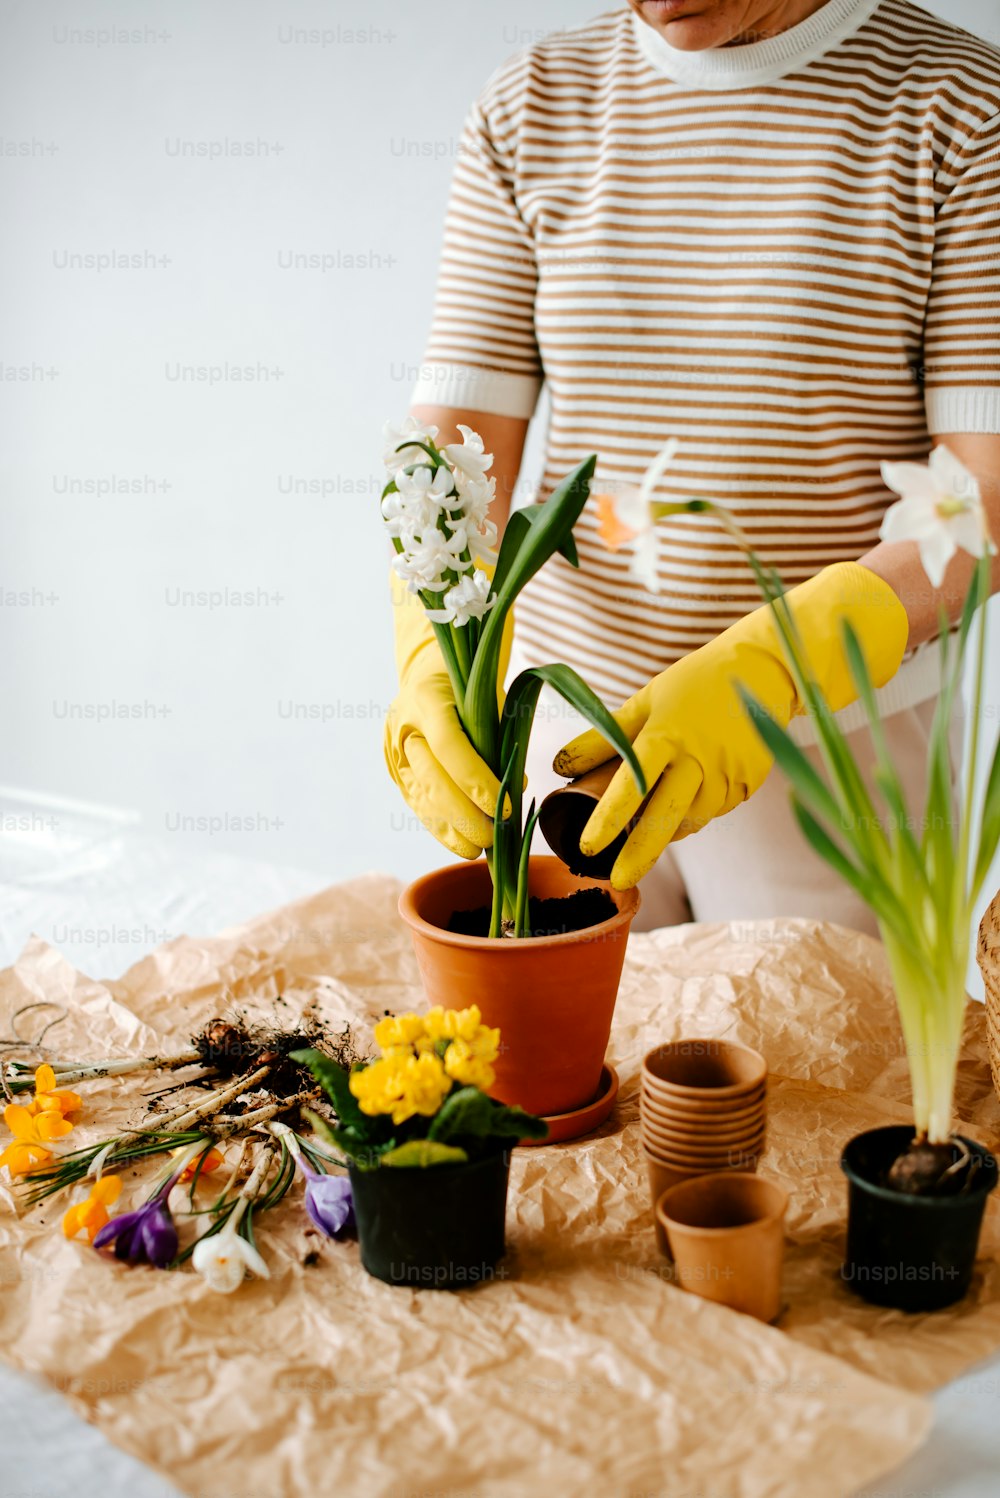 a woman in yellow gloves is cleaning a potted plant